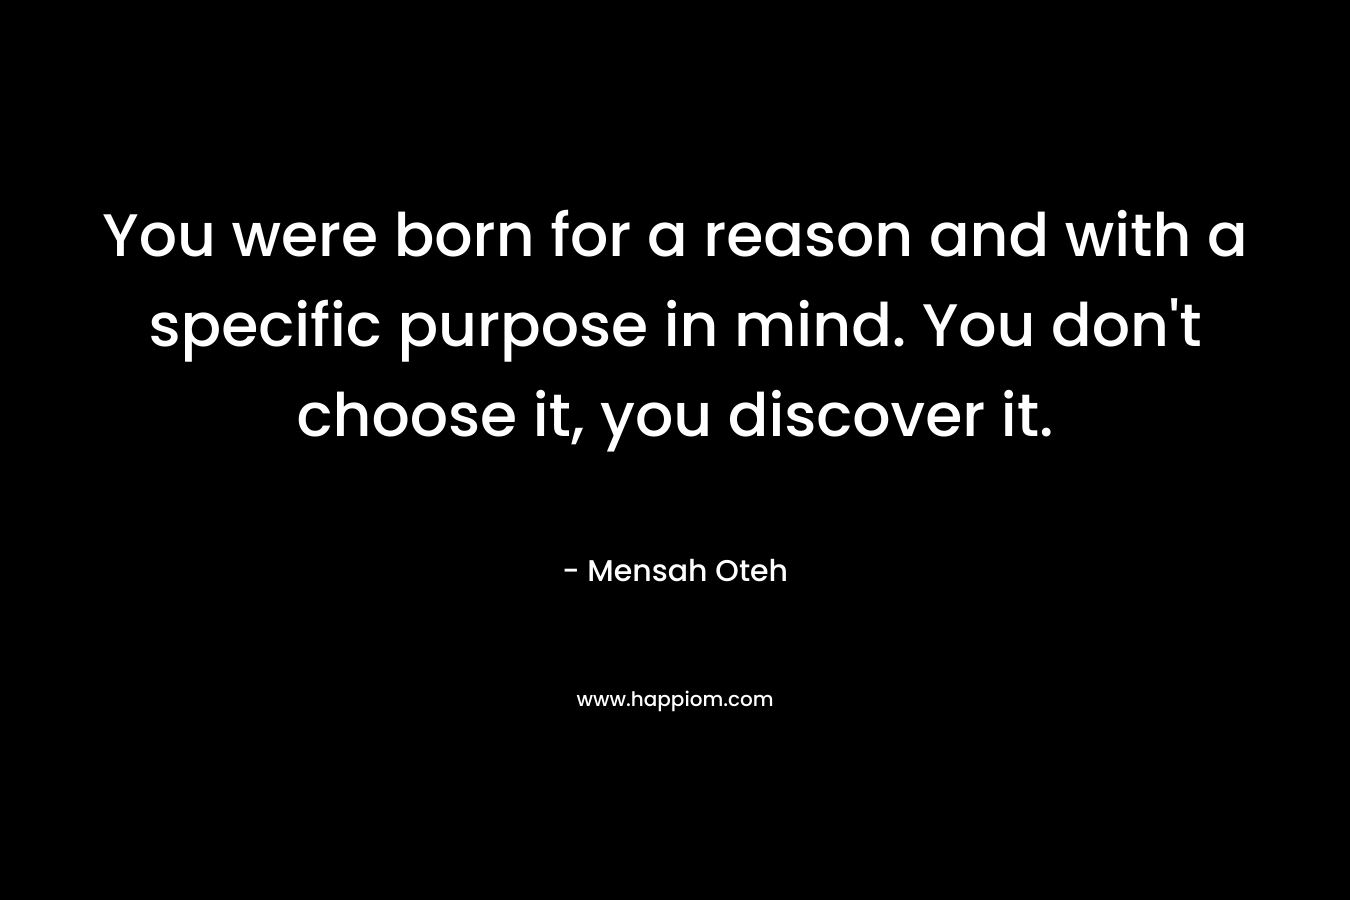 You were born for a reason and with a specific purpose in mind. You don't choose it, you discover it.